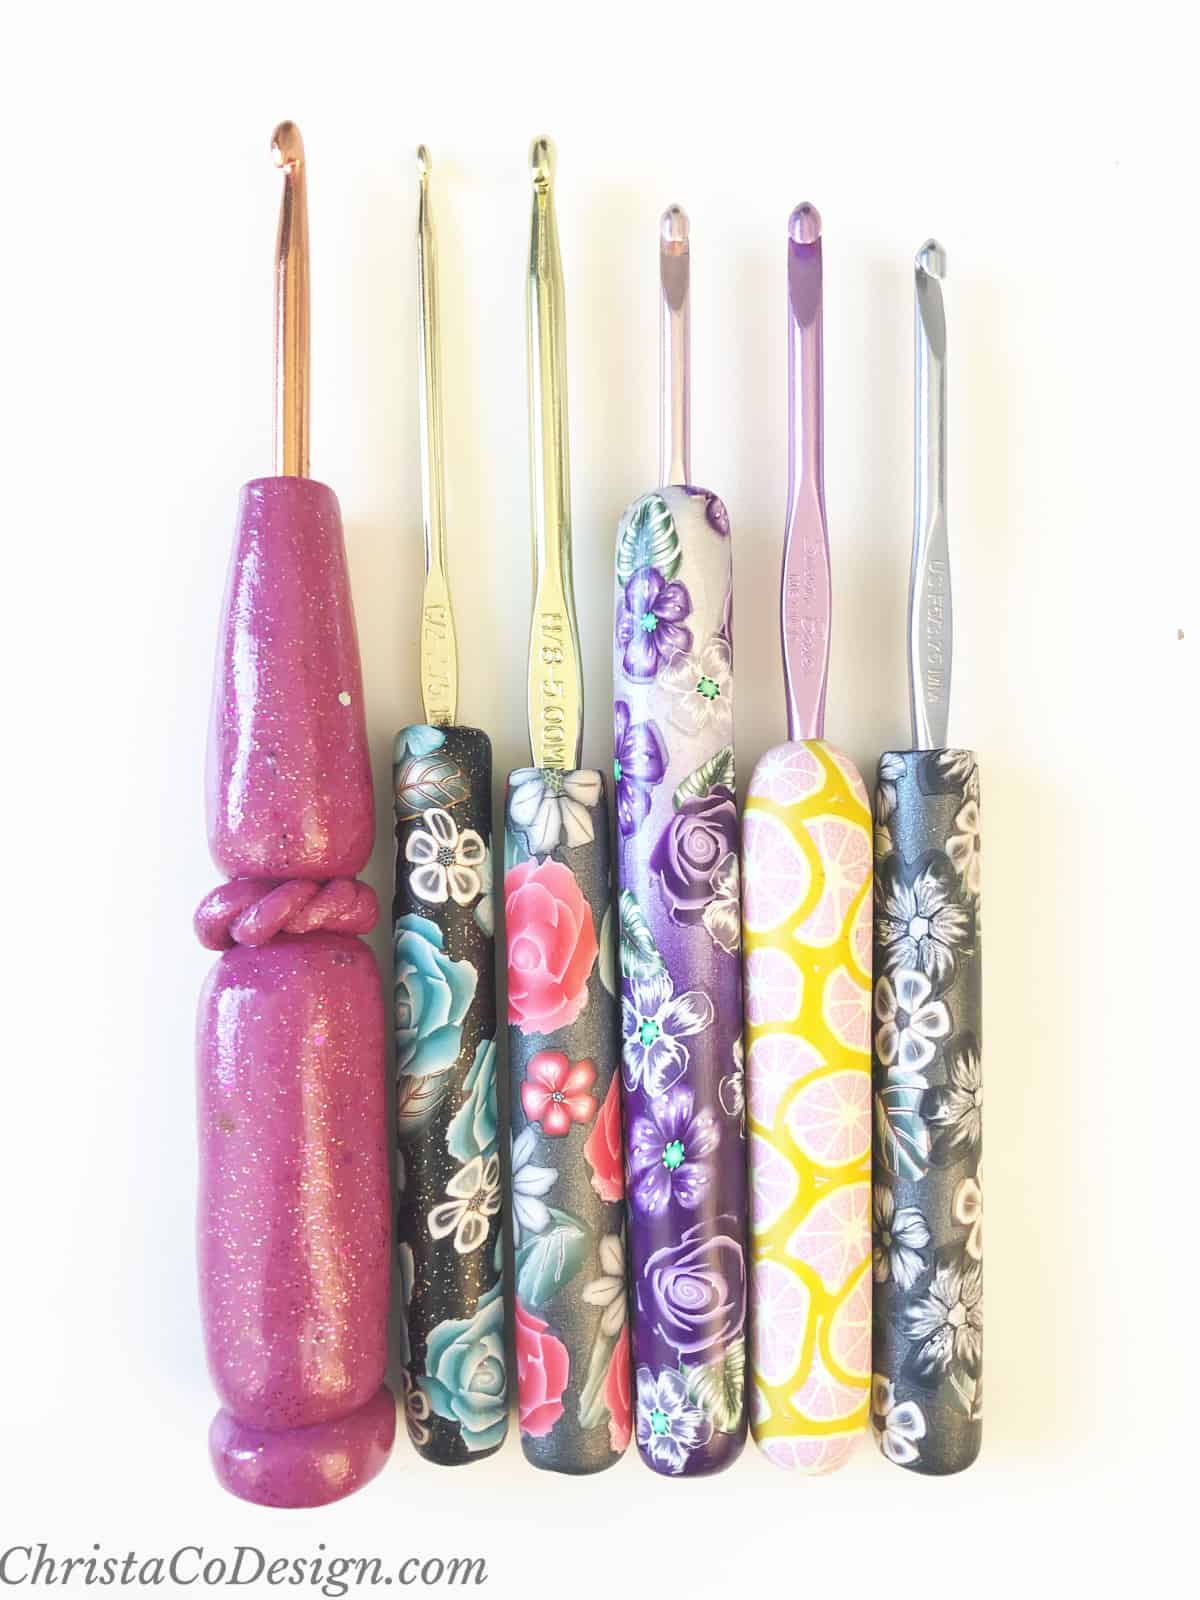 Set of crochet hooks with colorful and floral clay polymer handles added for comfort.